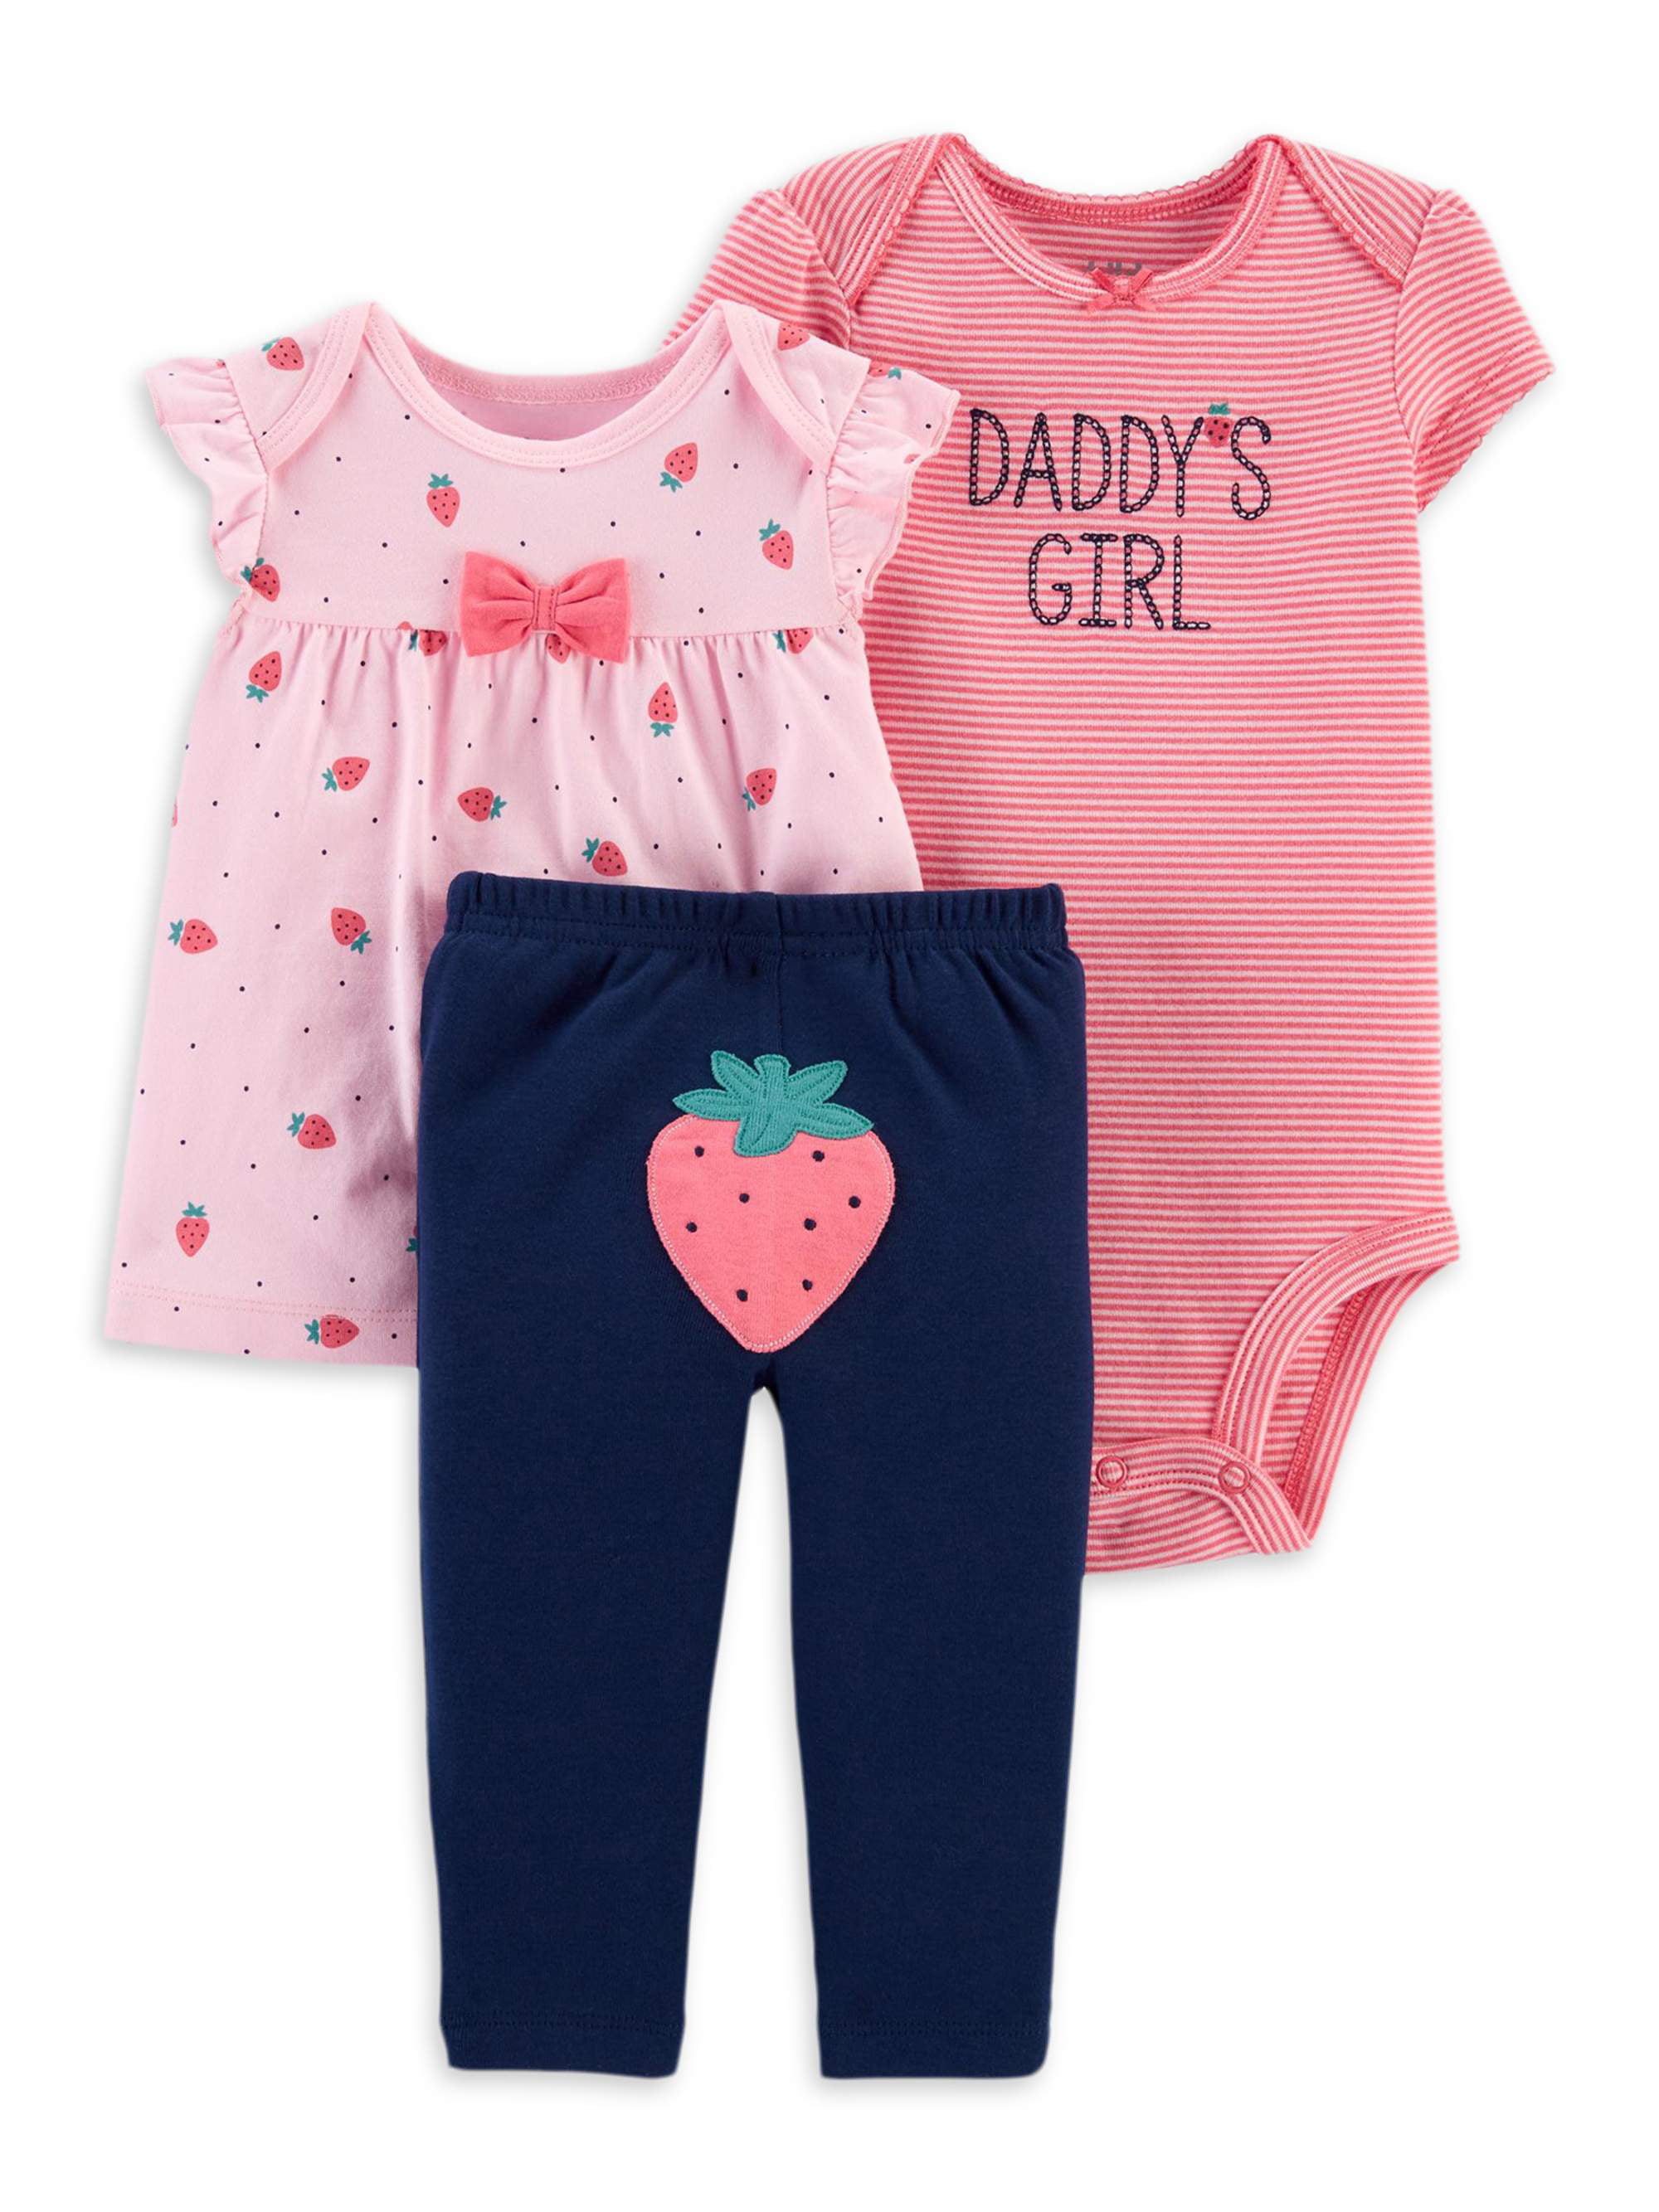 NEW CHILD OF MINE BY CARTERS BABY GIRL 12 MONTHS 3 PC BODYSUIT T-SHIRT & PANTS